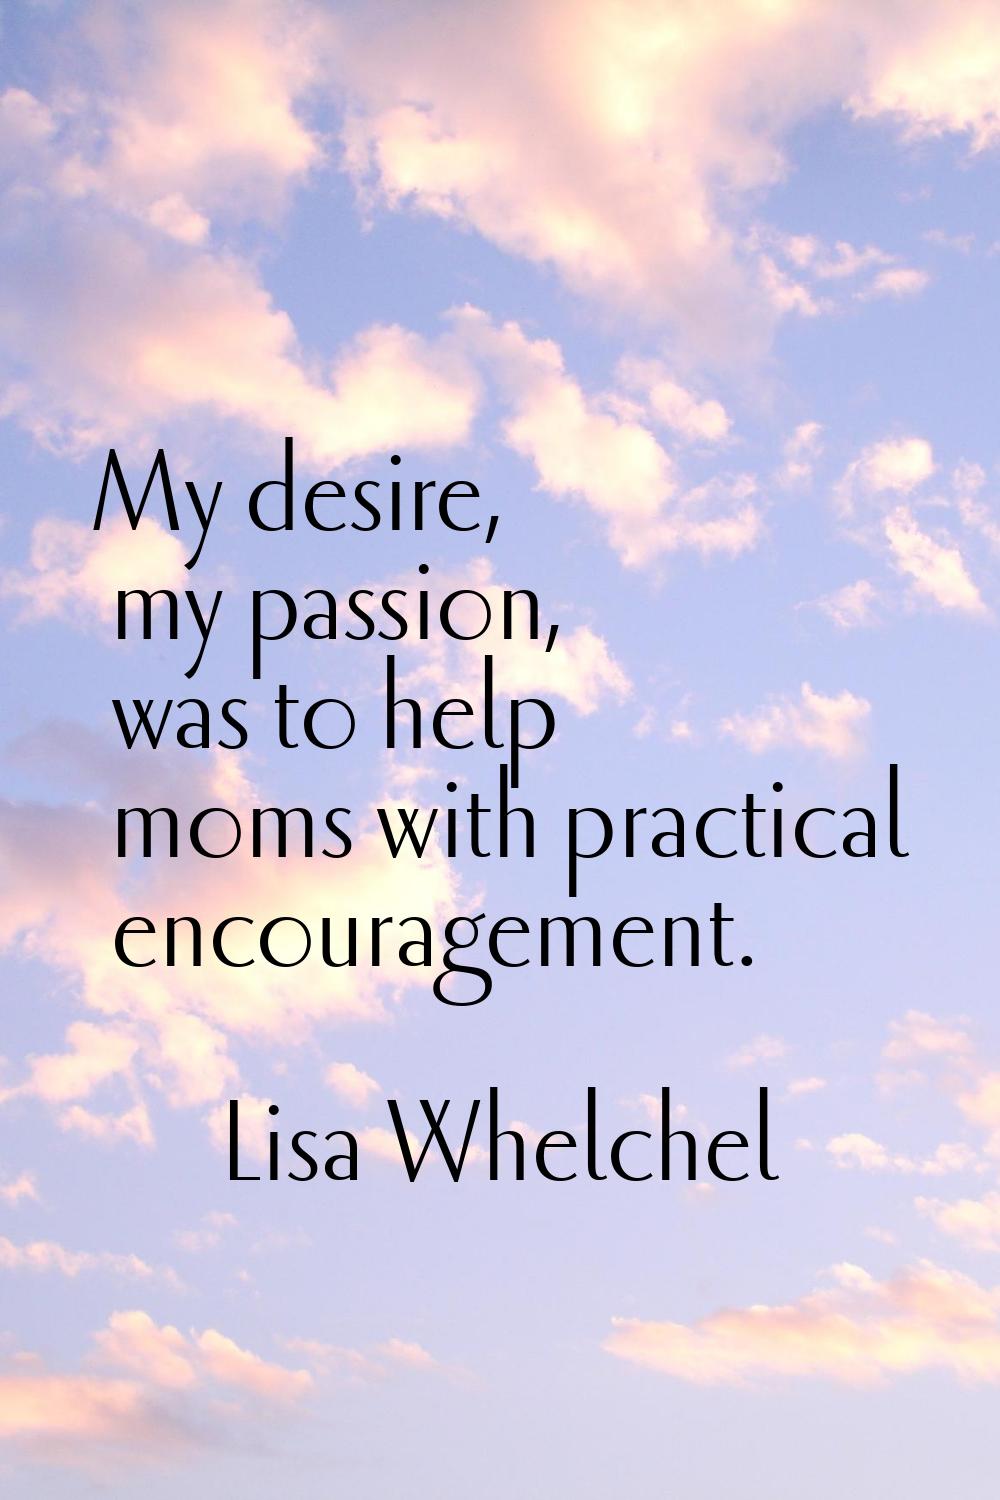 My desire, my passion, was to help moms with practical encouragement.